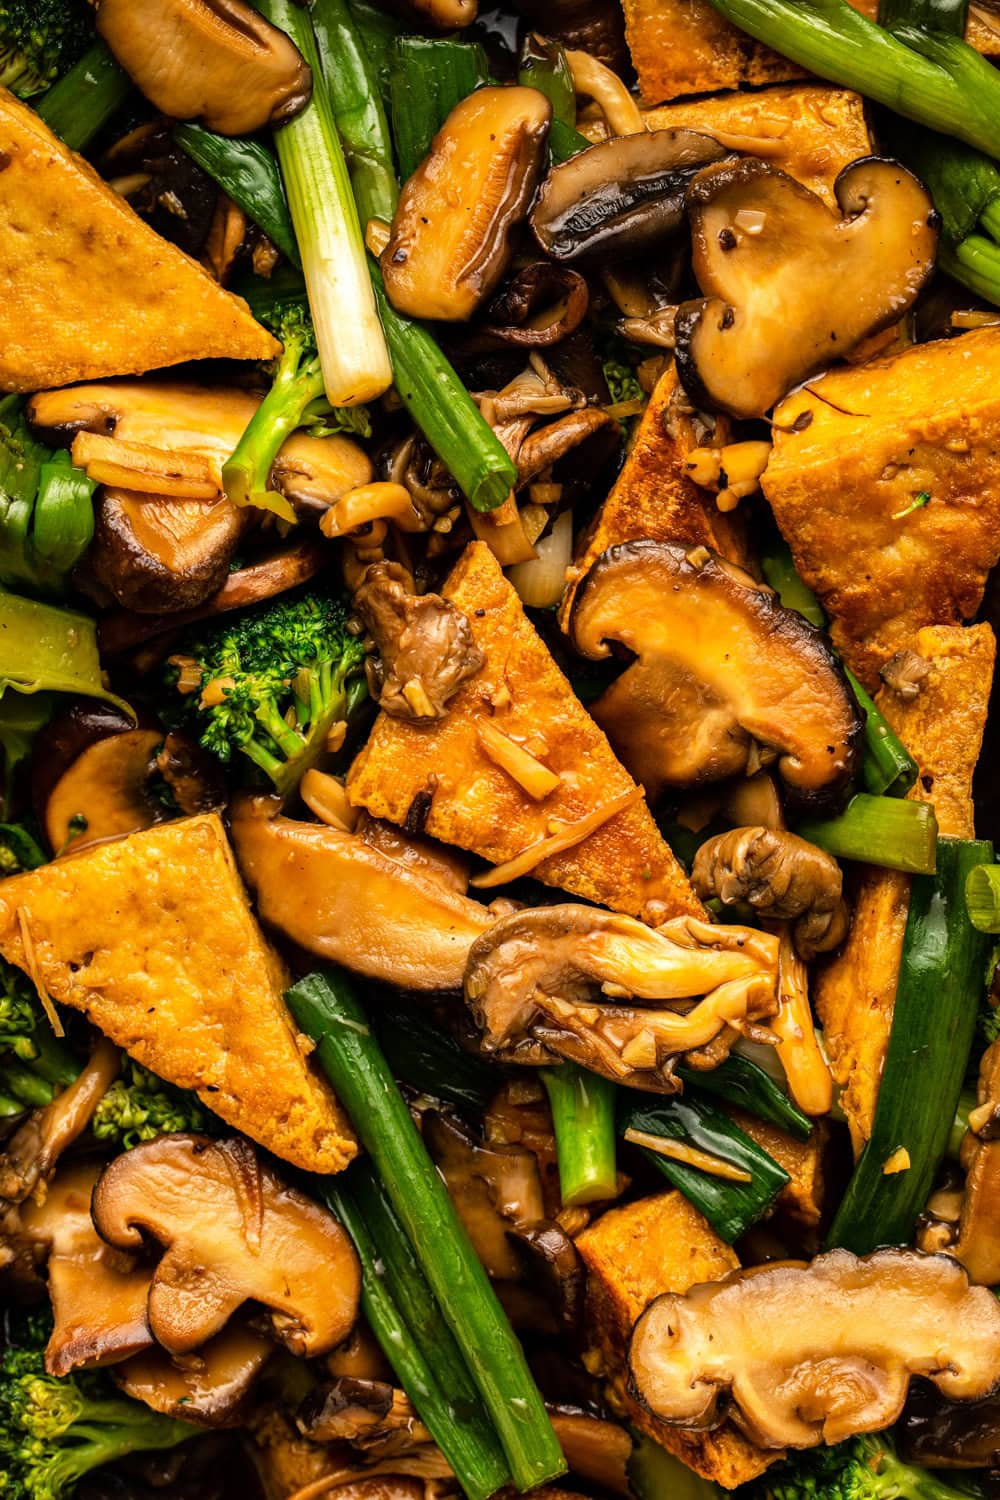 a zoomed in photo of tofu mushroom stir fry showing its texture